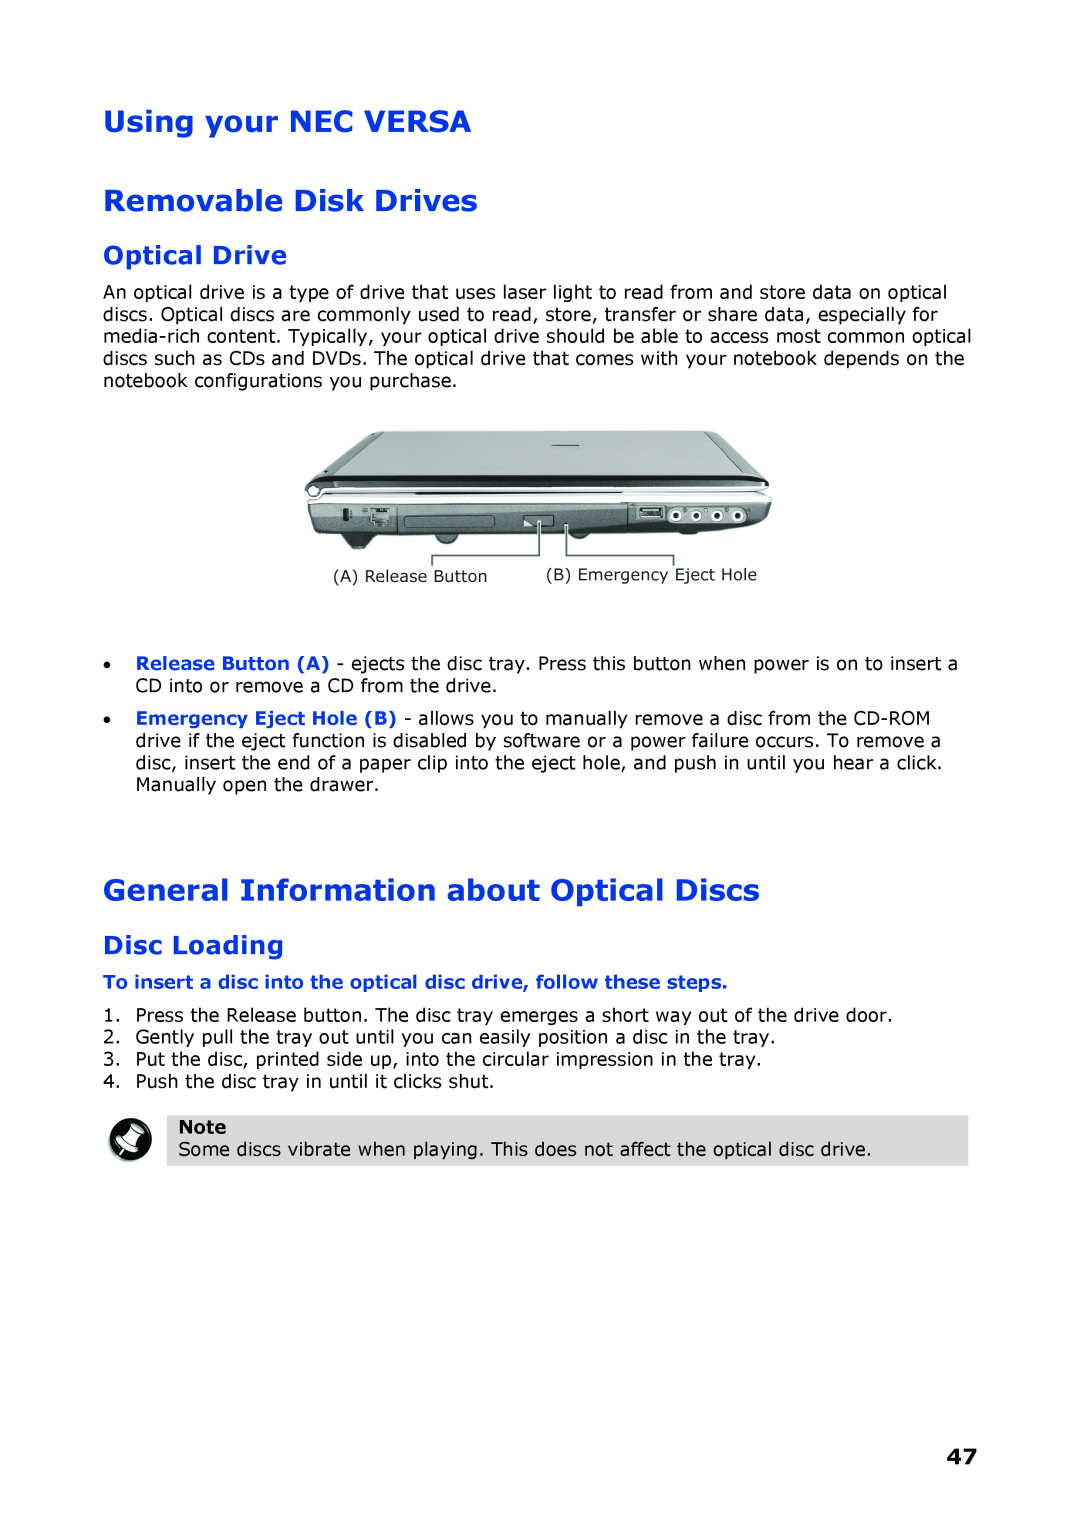 NEC P8510 Using your NEC VERSA Removable Disk Drives, General Information about Optical Discs, Optical Drive, Disc Loading 